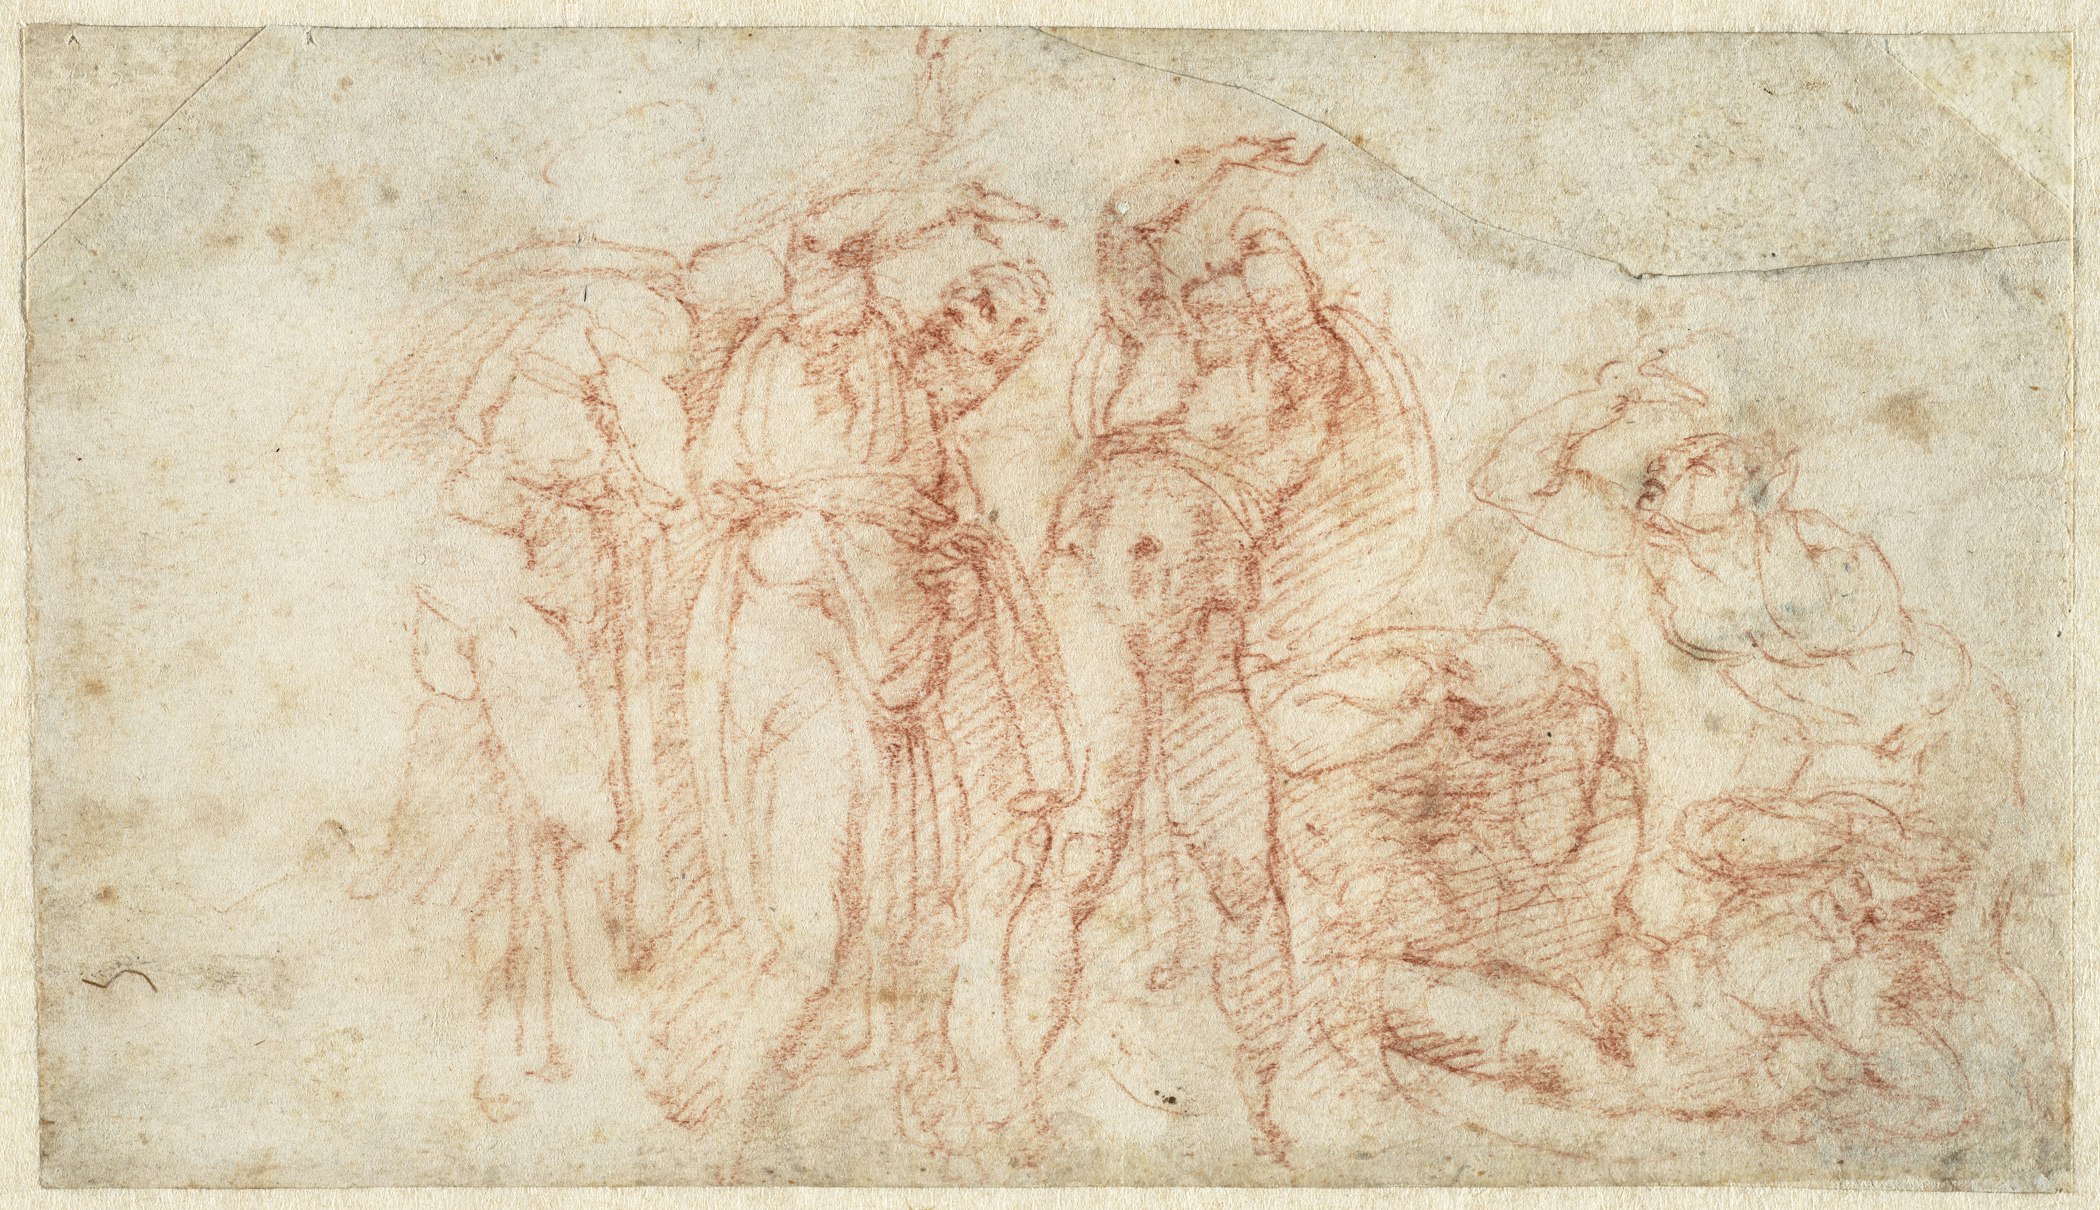 A rough sketch os six figures cowering in fear, red on paper